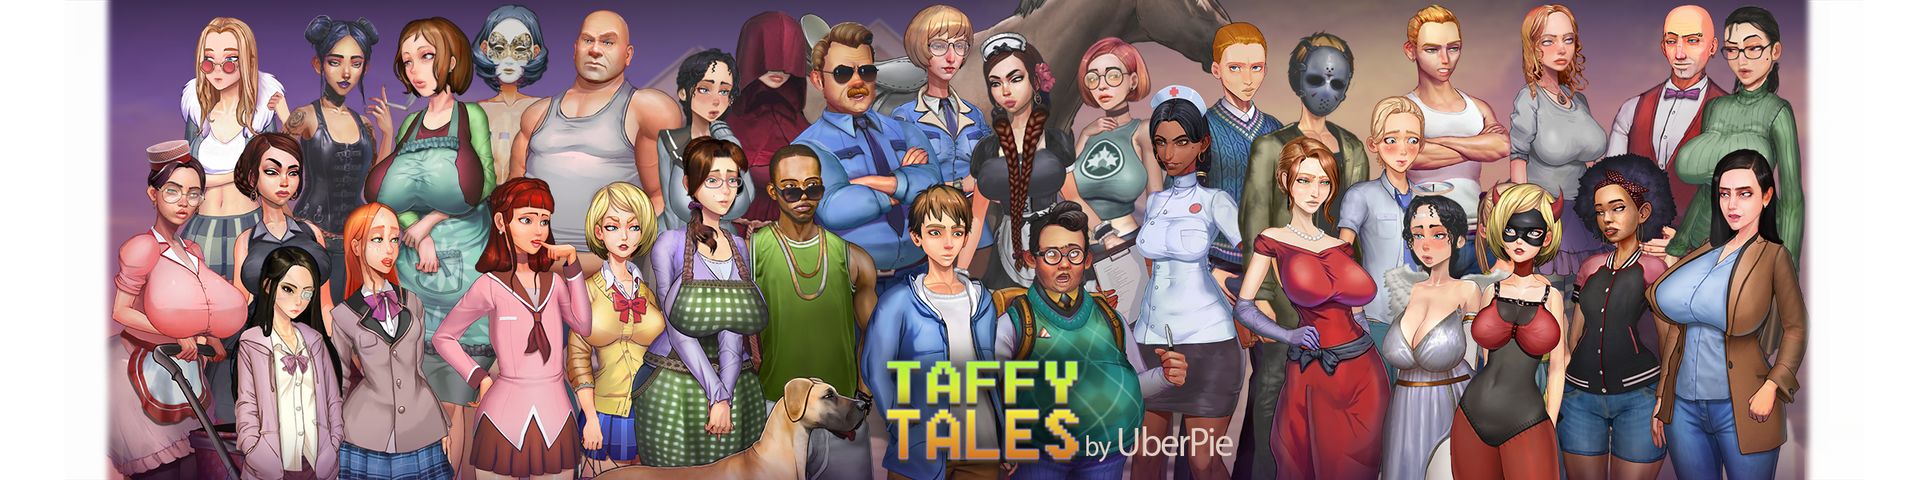 Taffy Tales Adult Game Download